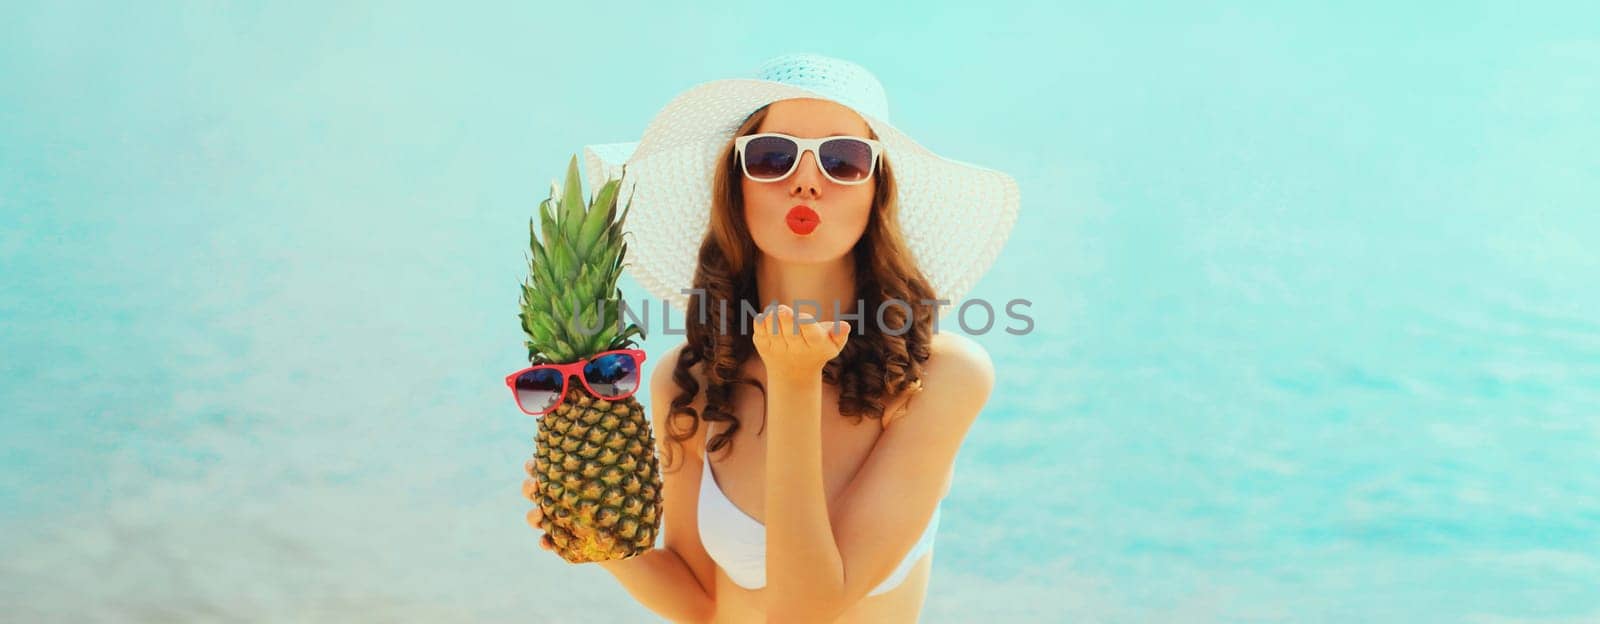 Summer vacation, beautiful happy young woman in bikini swimsuit and straw hat holding pineapple fruits blowing her lips sends kiss on the beach on sea coast background on sunny day